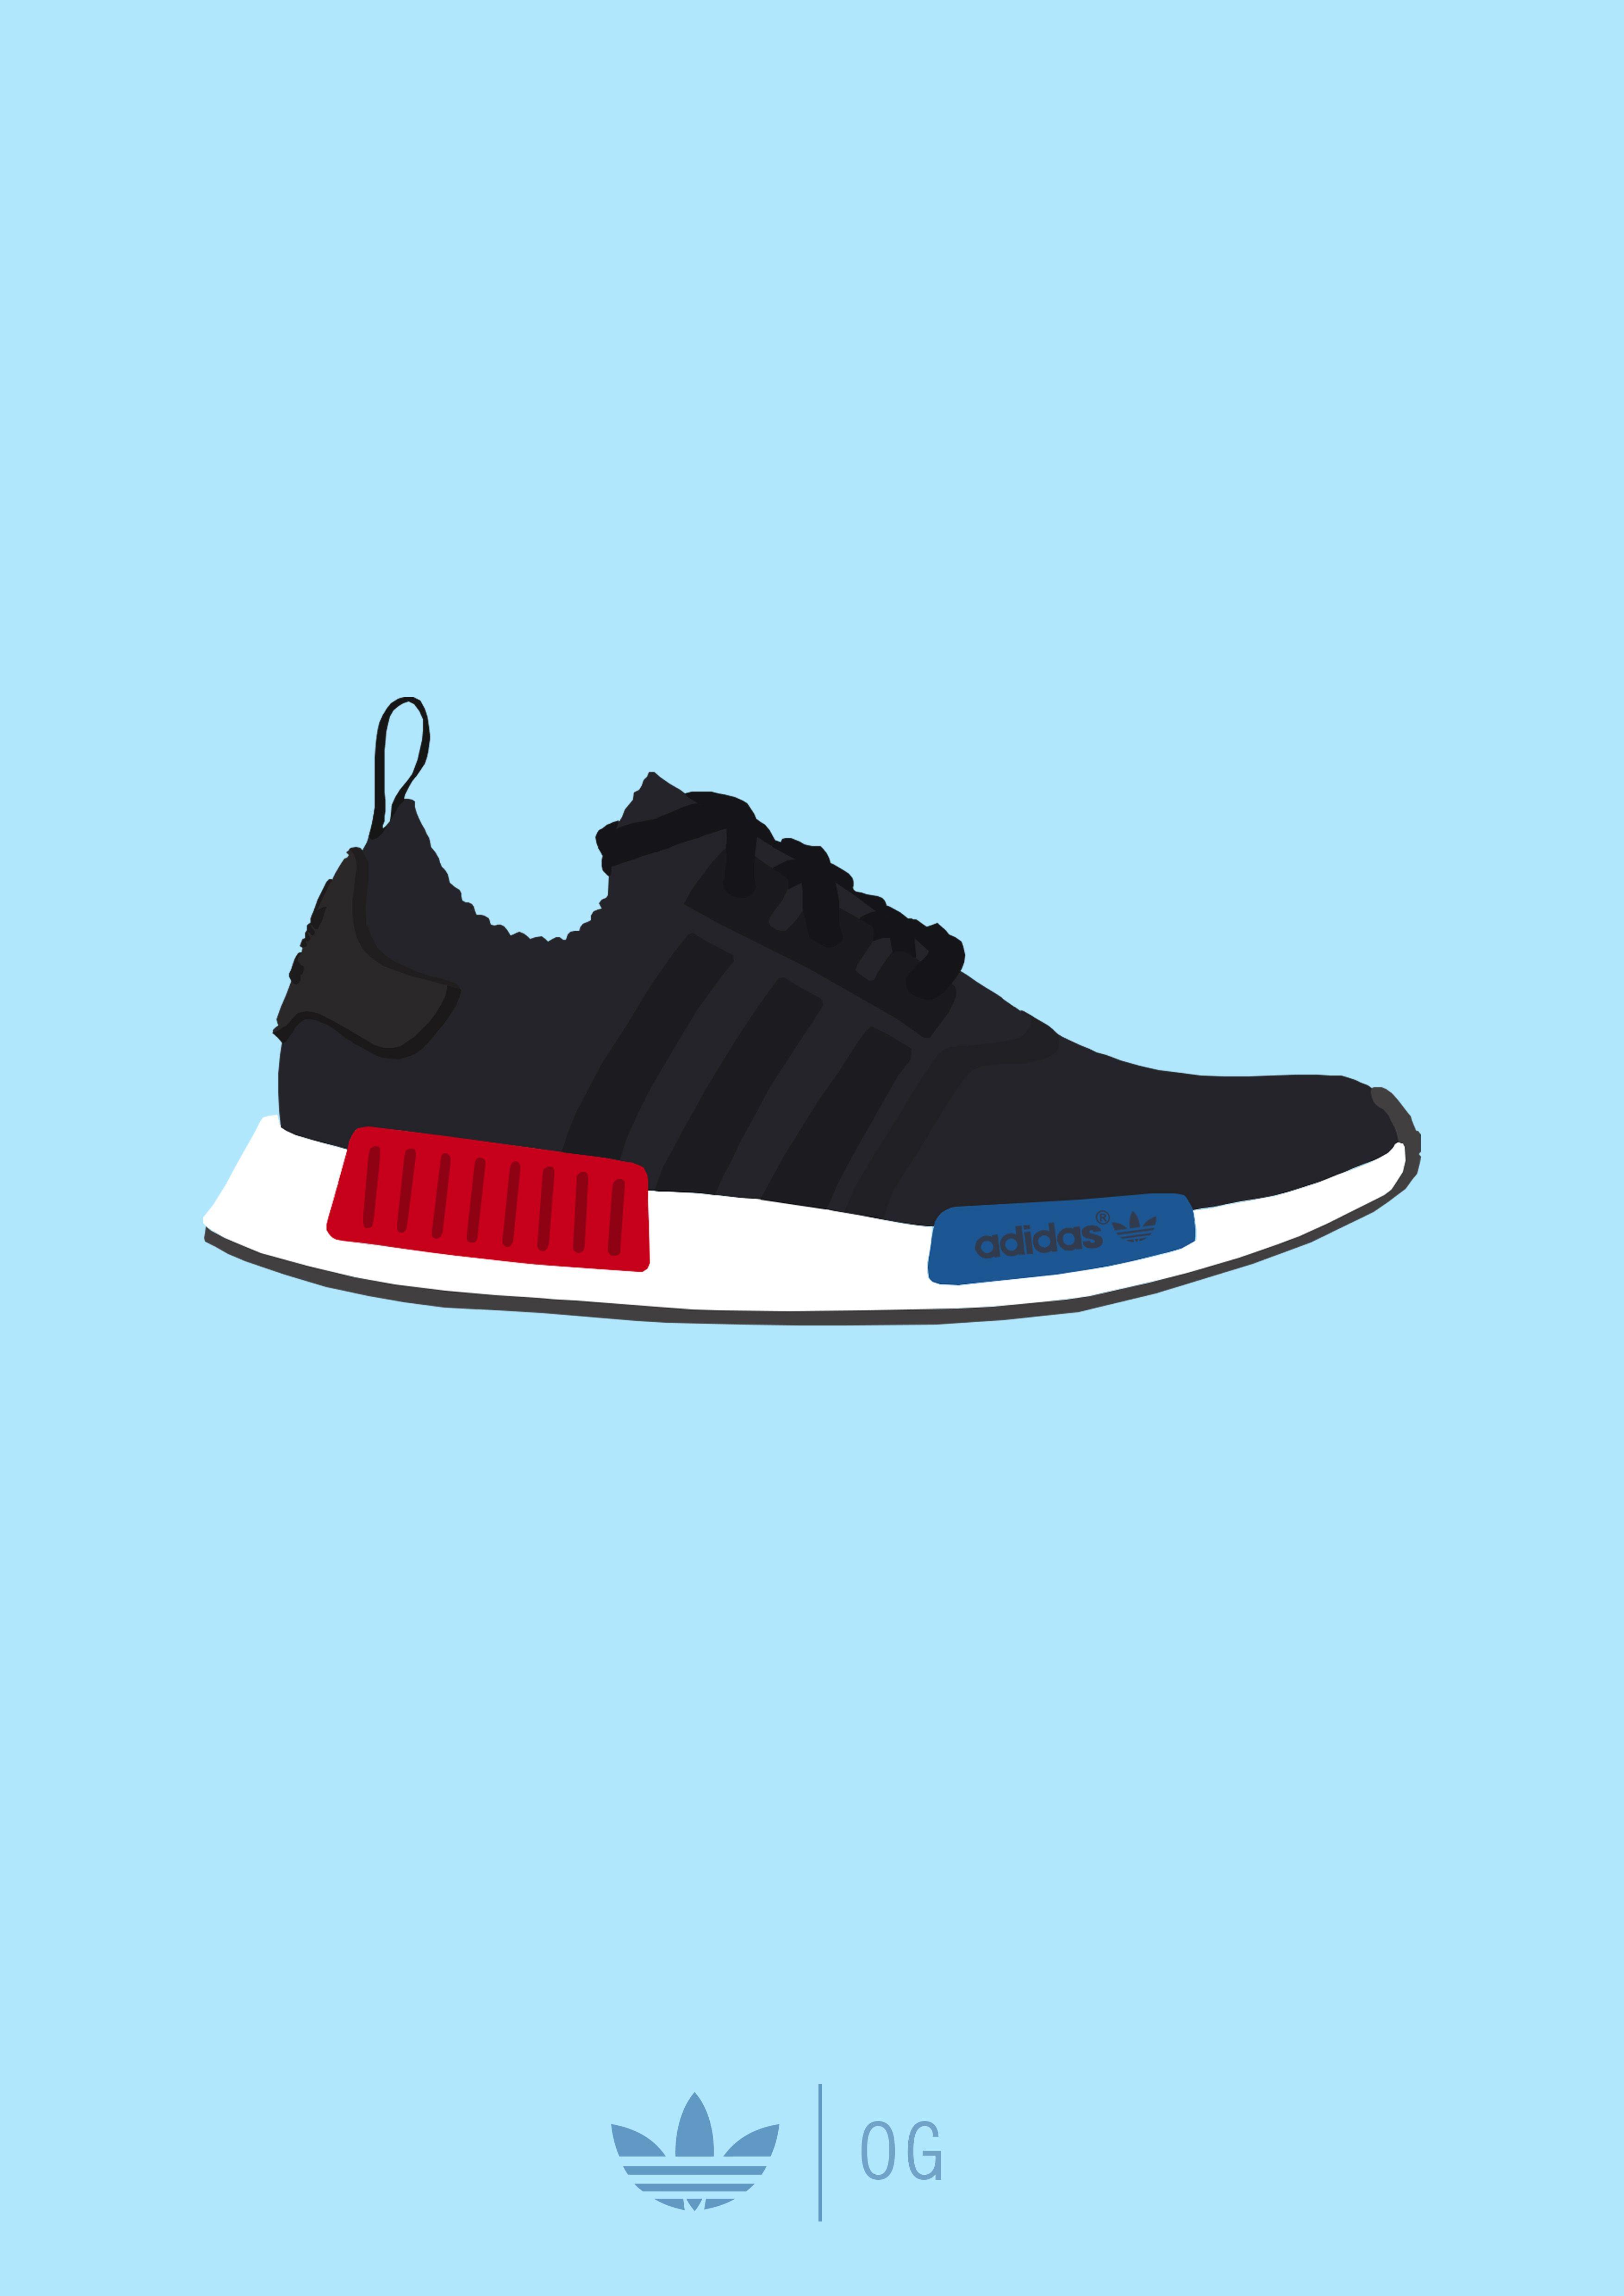 nmd background